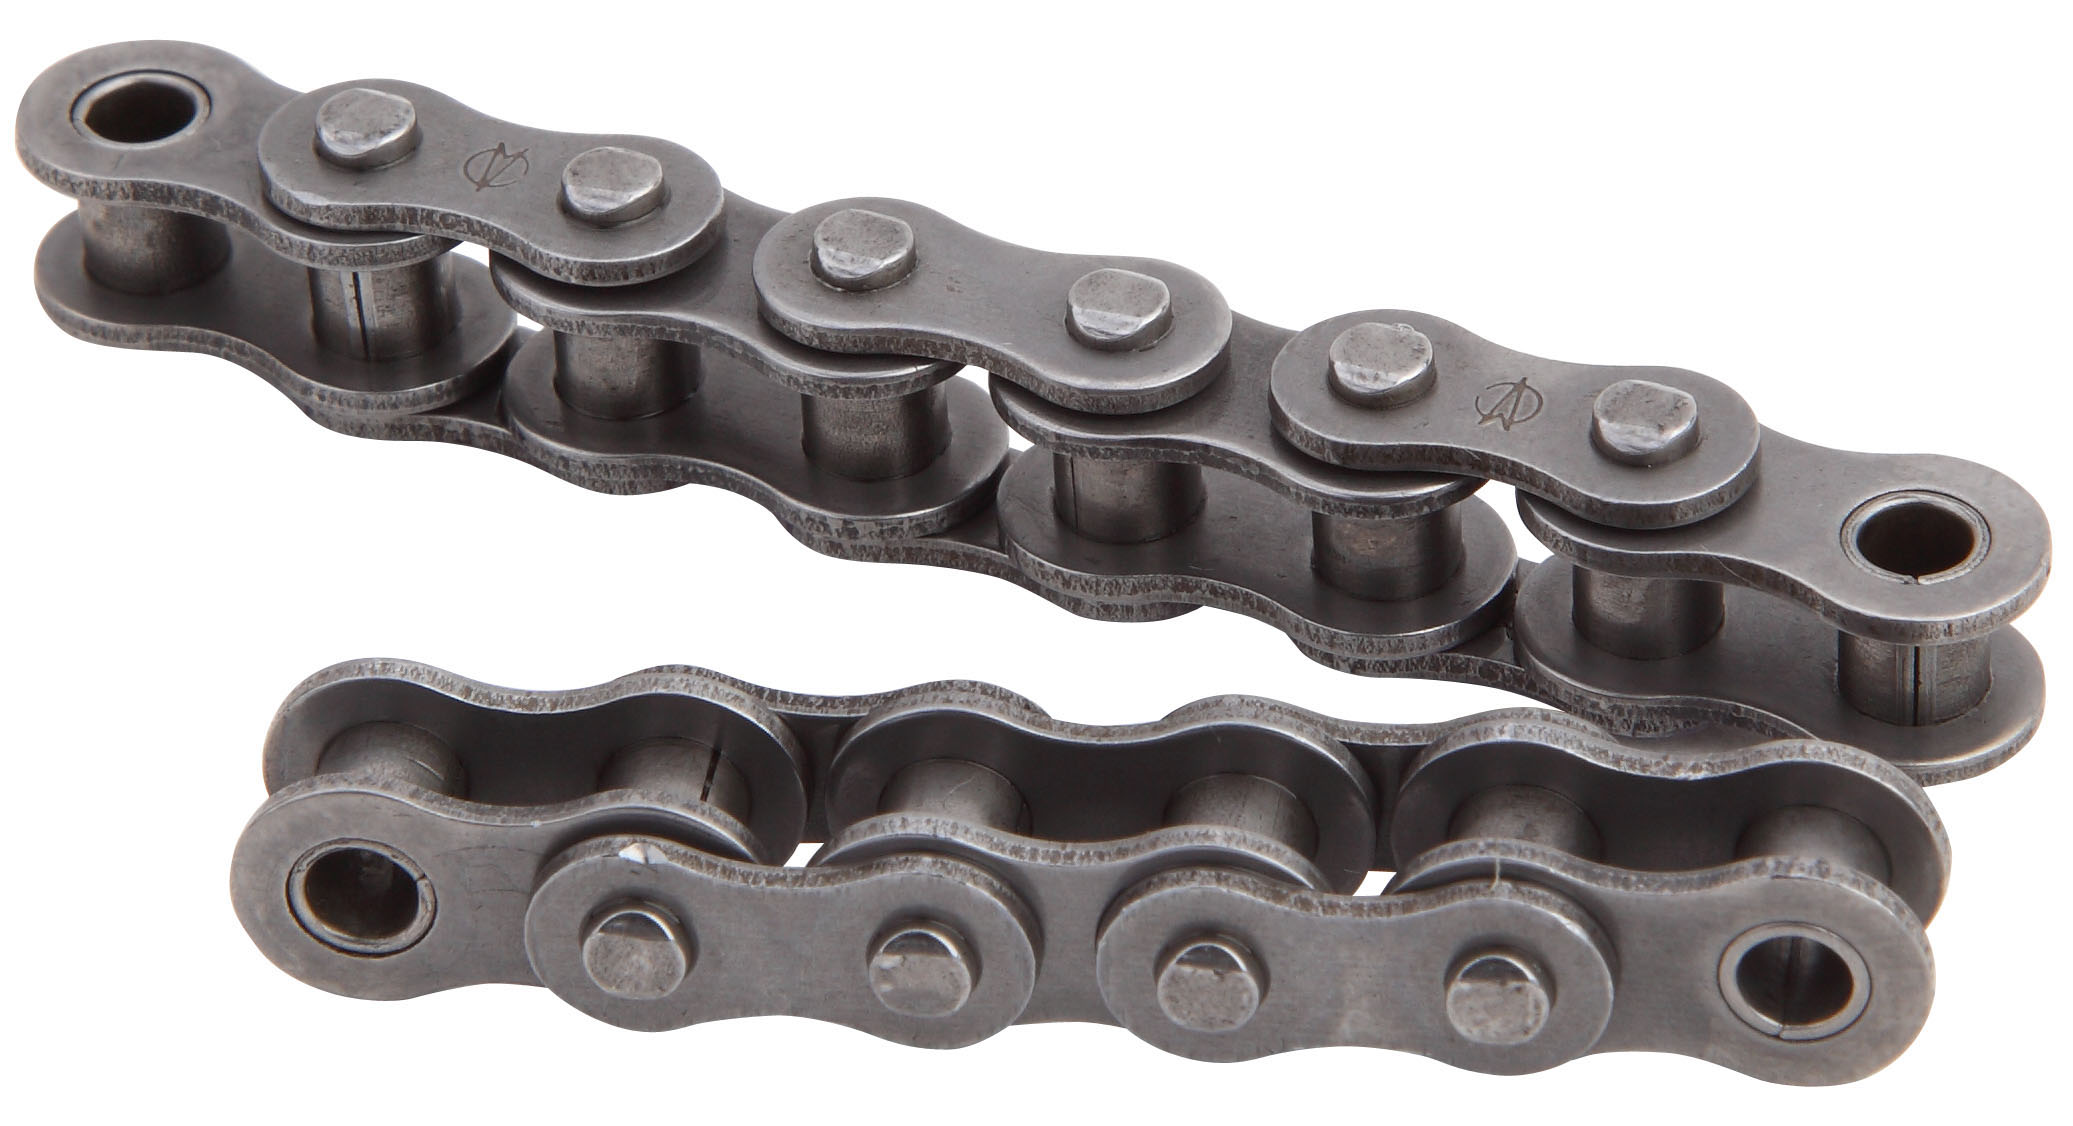 Motorcycle Chains Explained